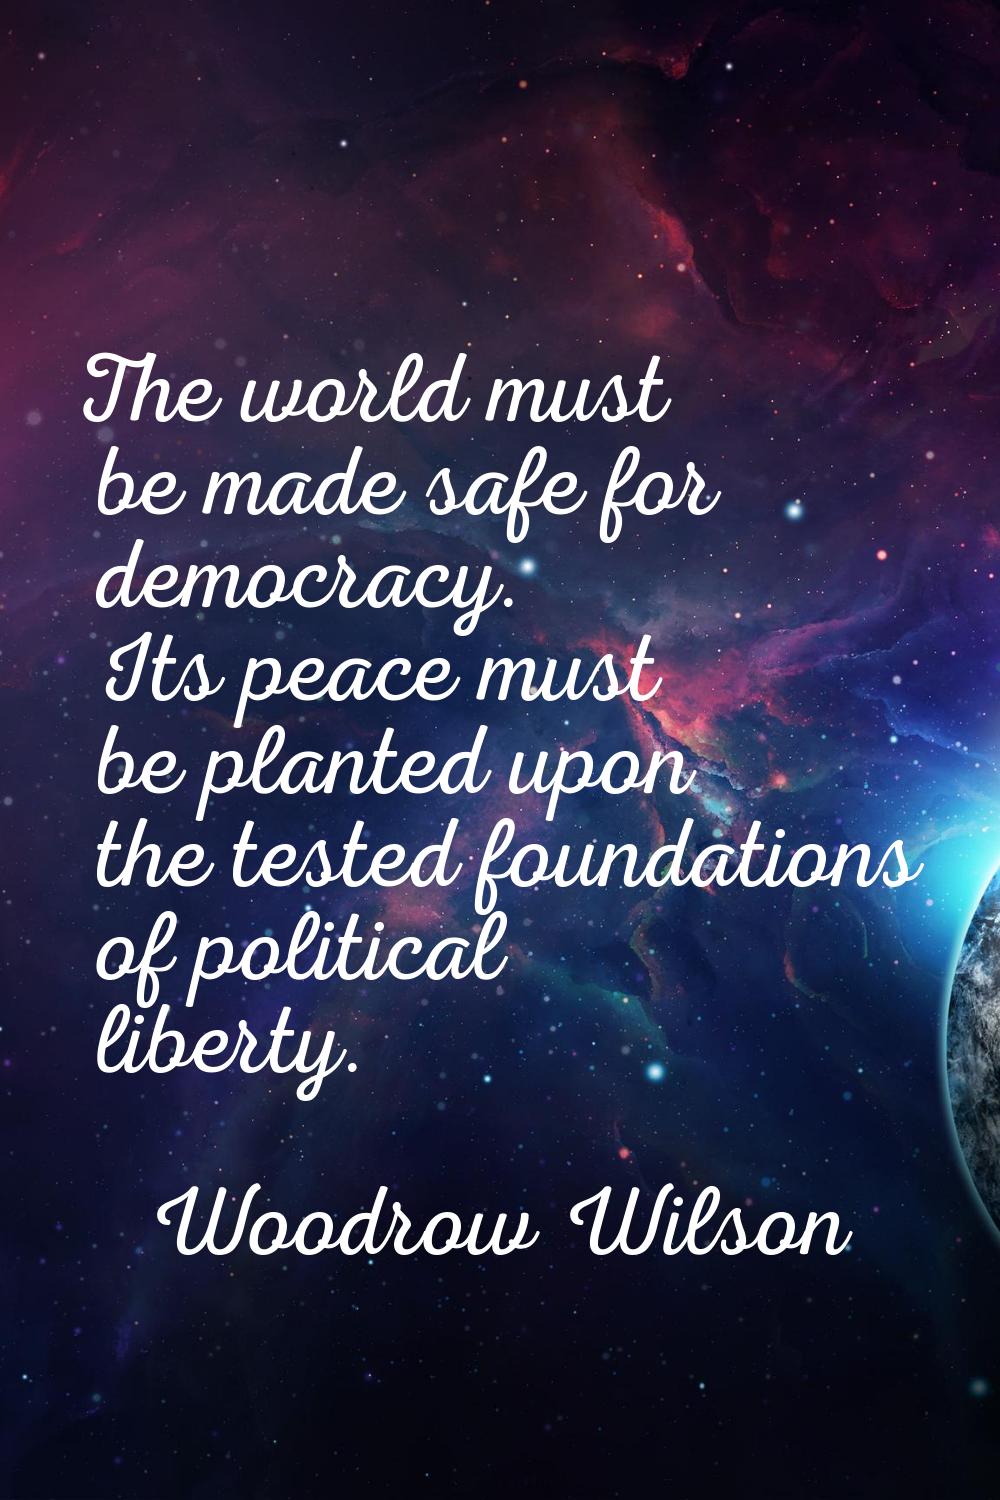 The world must be made safe for democracy. Its peace must be planted upon the tested foundations of